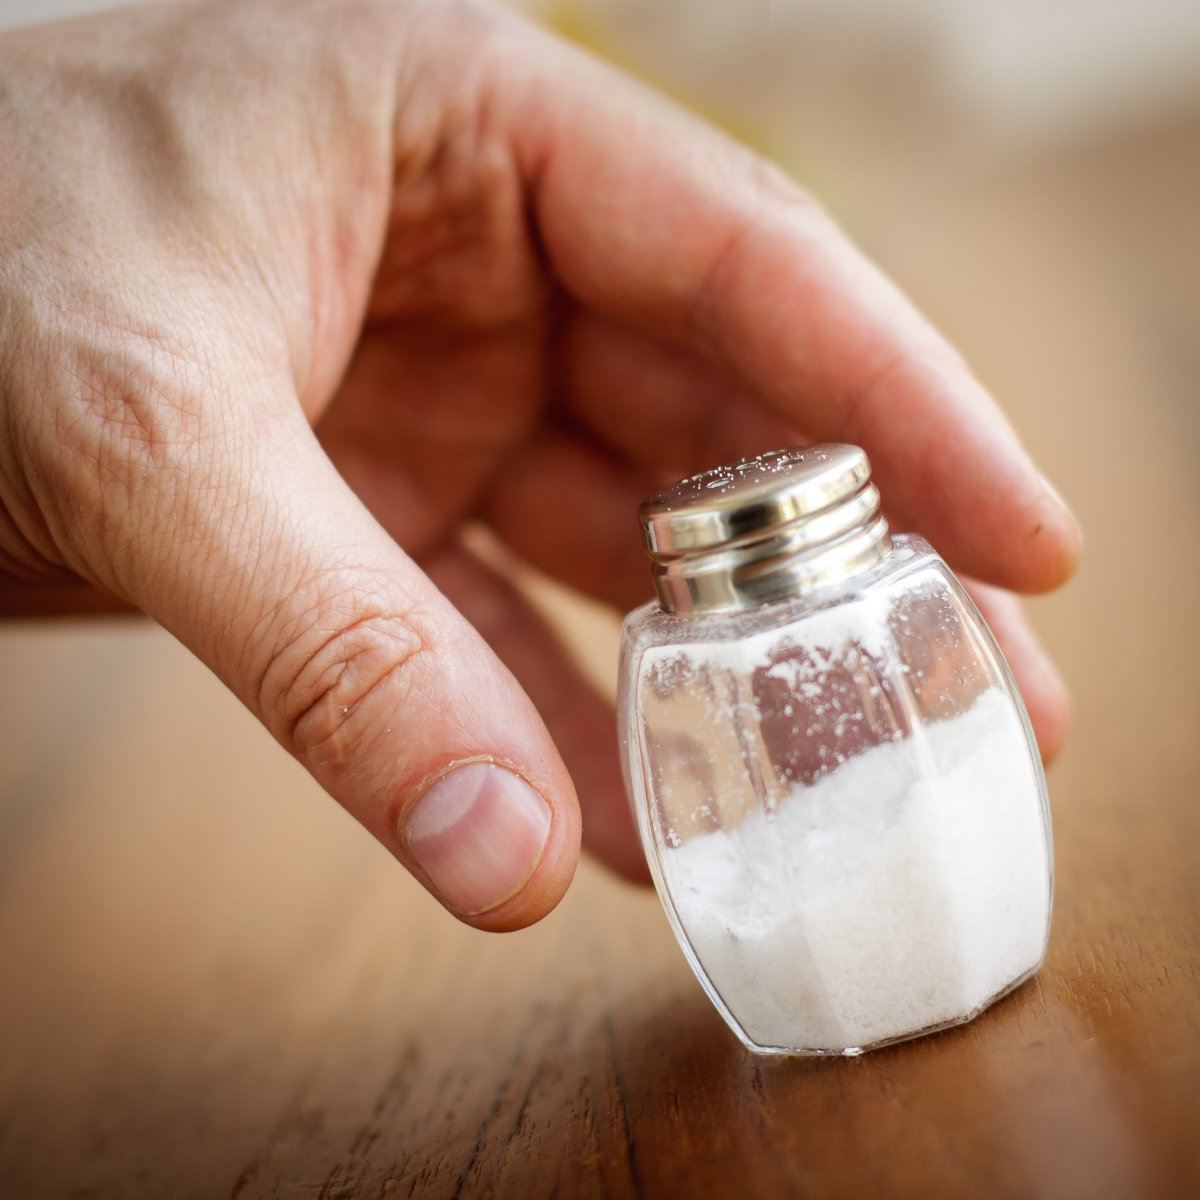 Salt Shaker Taken By Hand From Wooden Table